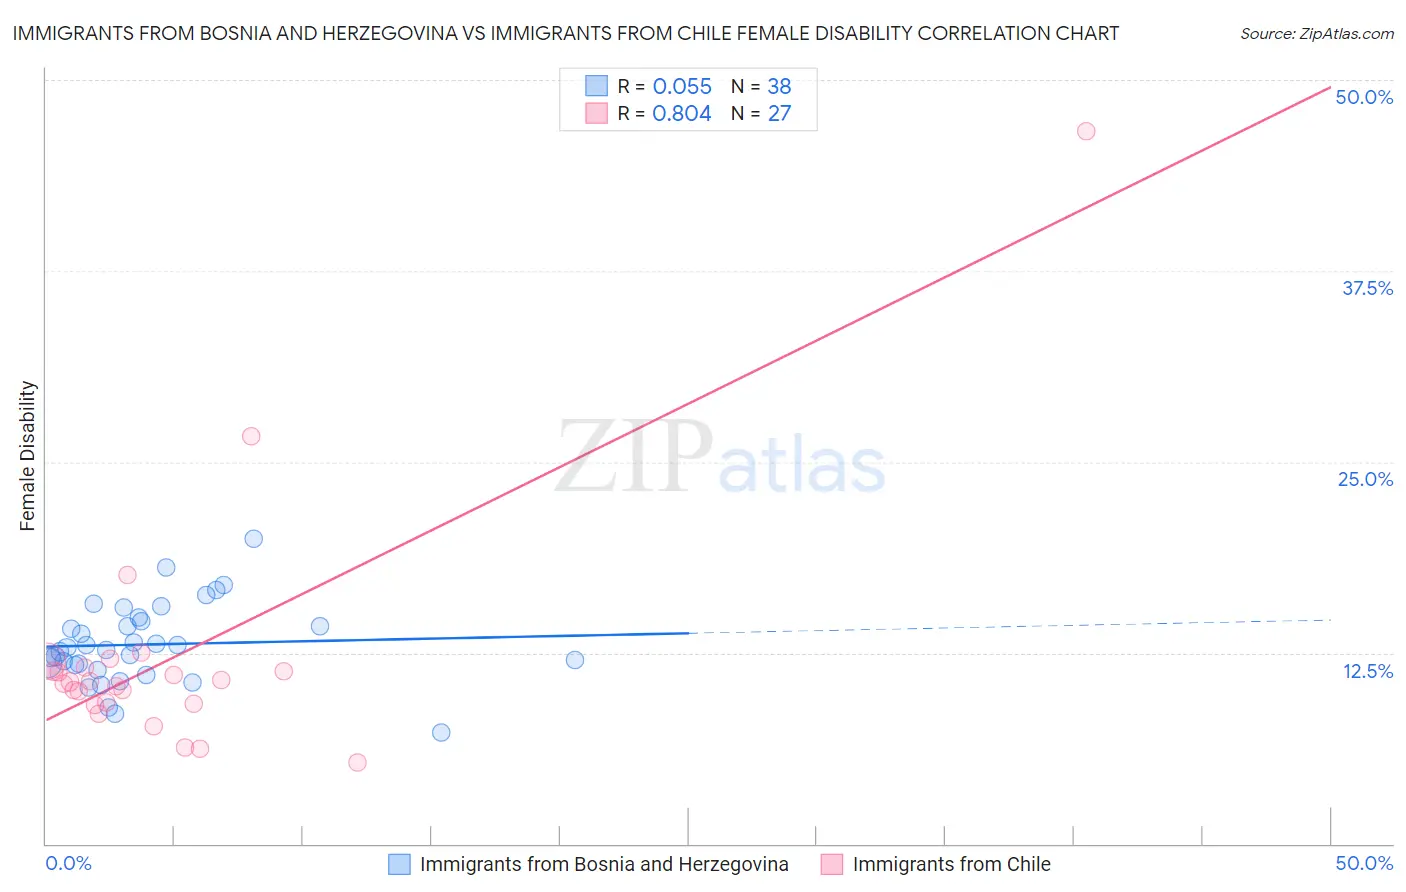 Immigrants from Bosnia and Herzegovina vs Immigrants from Chile Female Disability